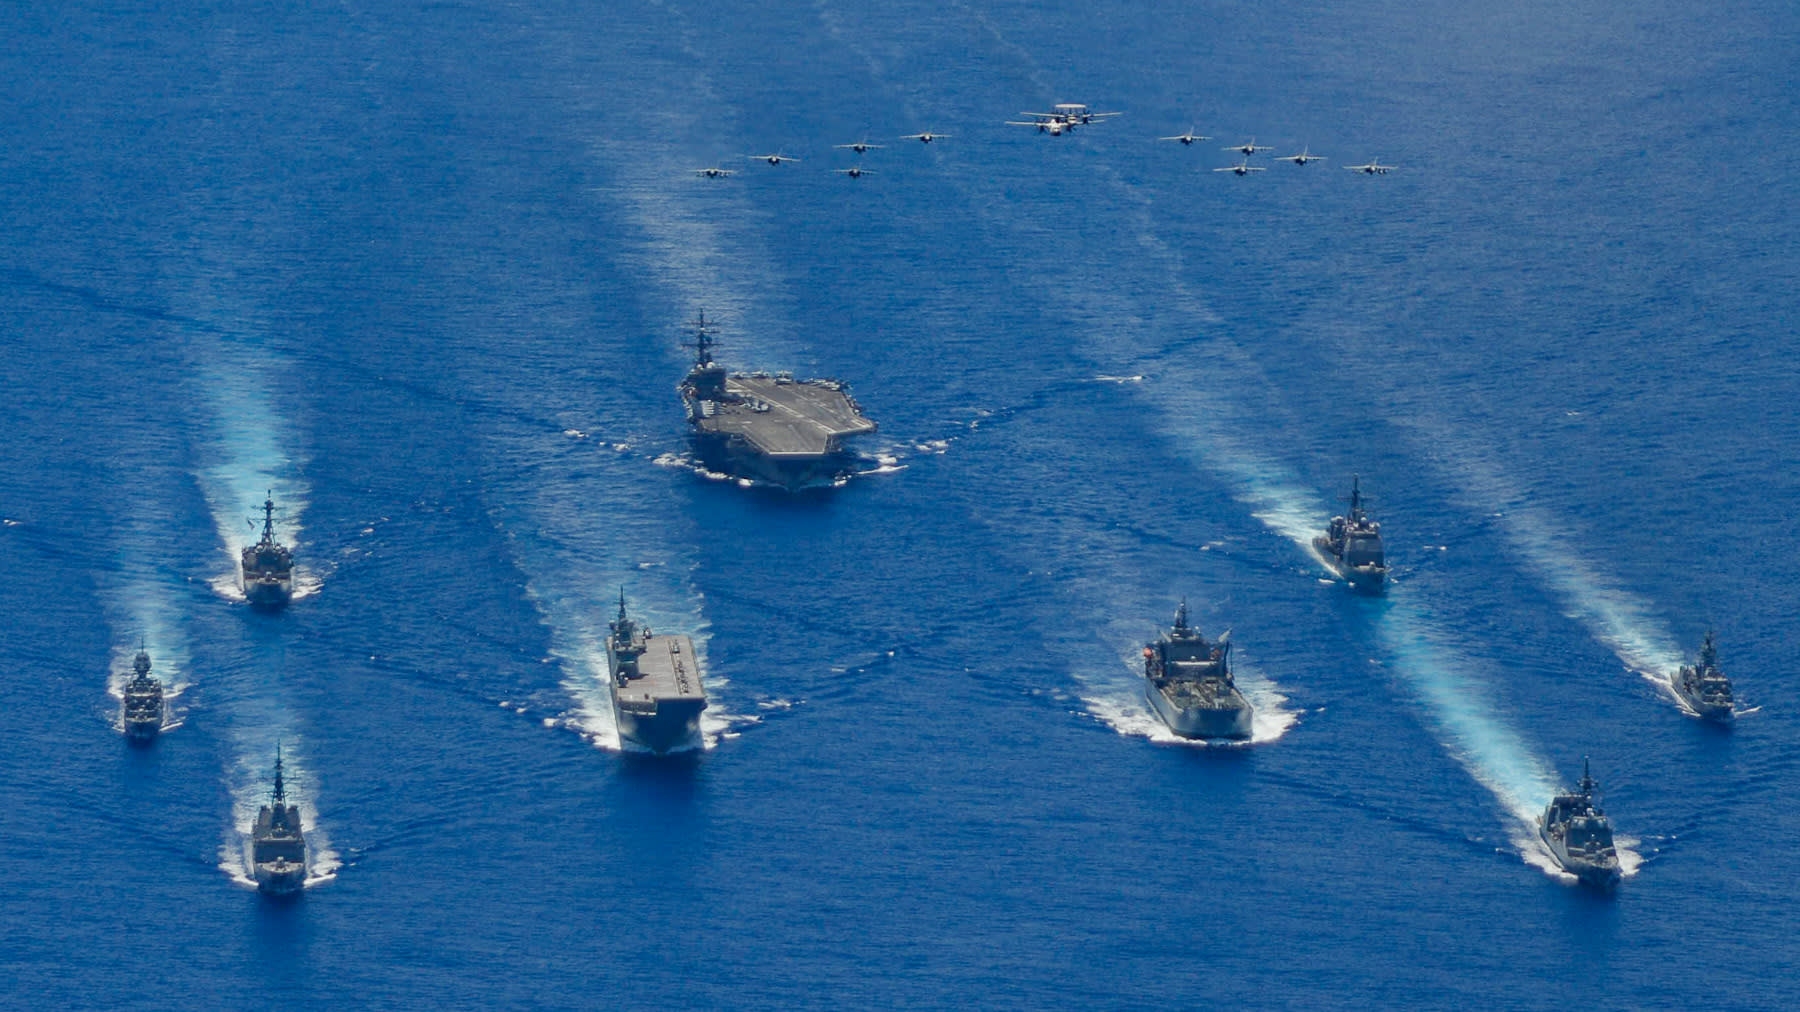 The ronald reagan carrier strike group and units from the japan maritime self-defense force and australian defense participate in trilateral exercises the philippine sea on july 21